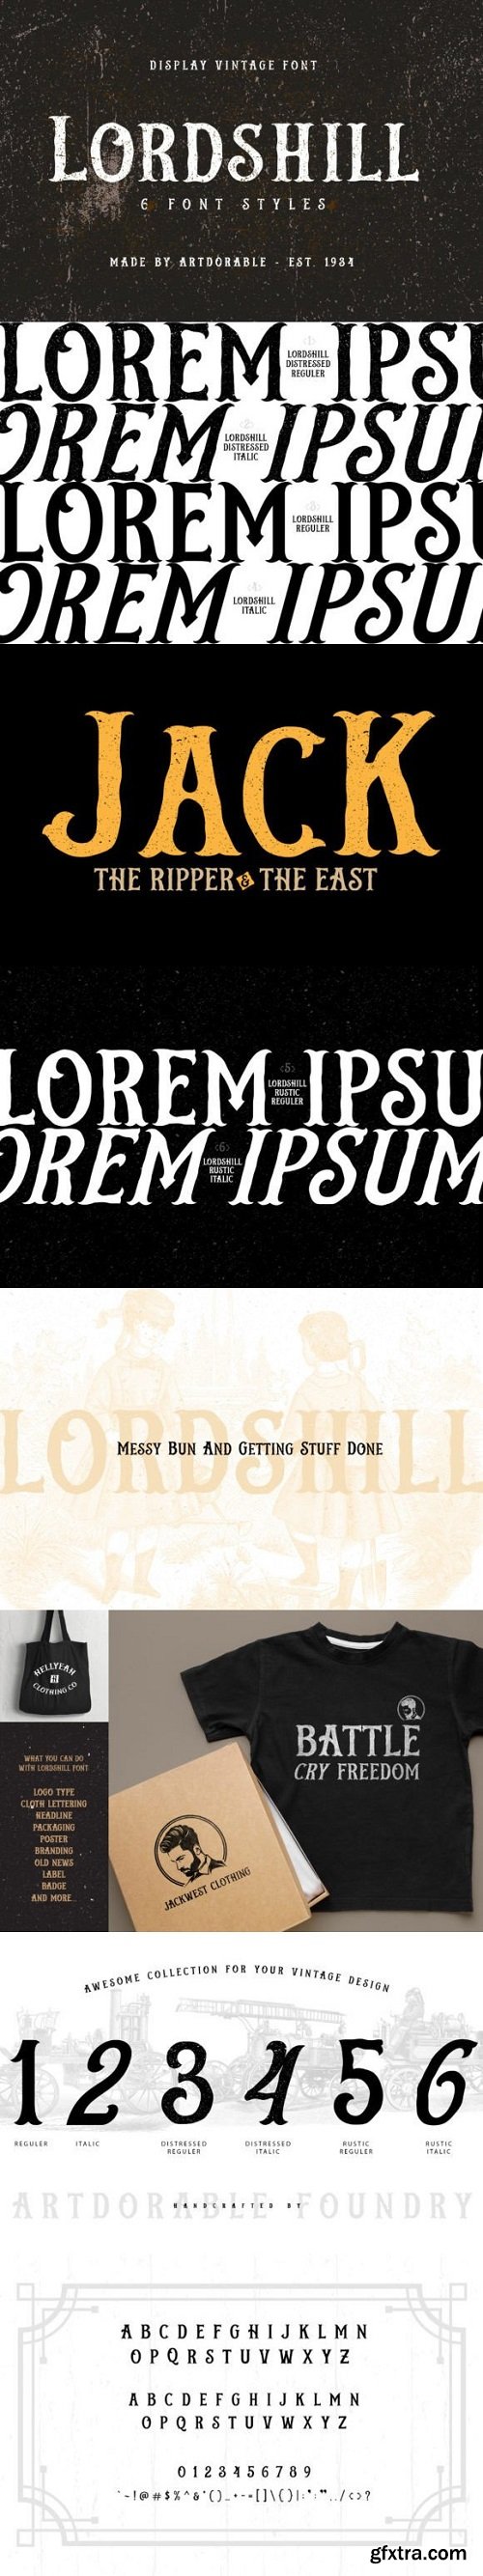 Lordshill Font Family